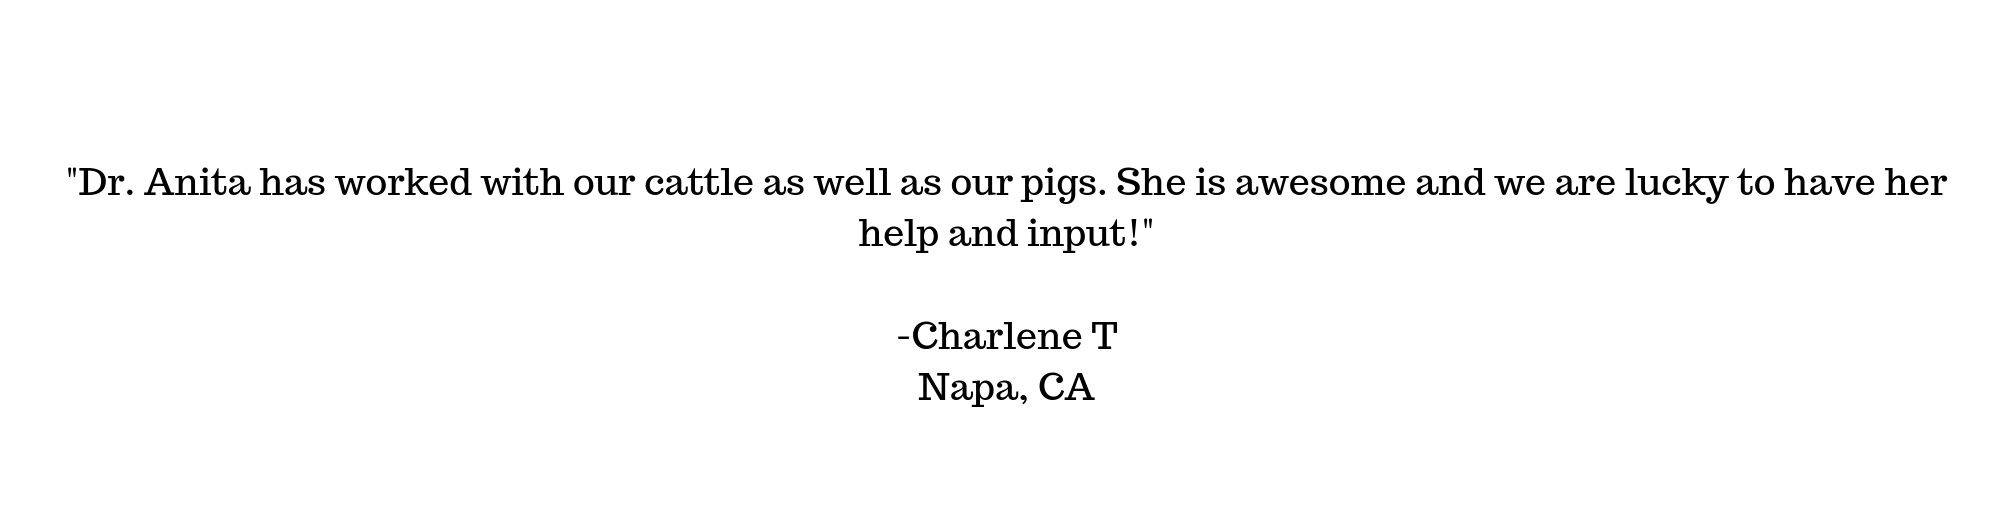 _Dr. Anita has worked with our cattle as well as our pigs. She is awesome and we are lucky to have her help and input!_ -Charlene T _Napa, CA.jpg